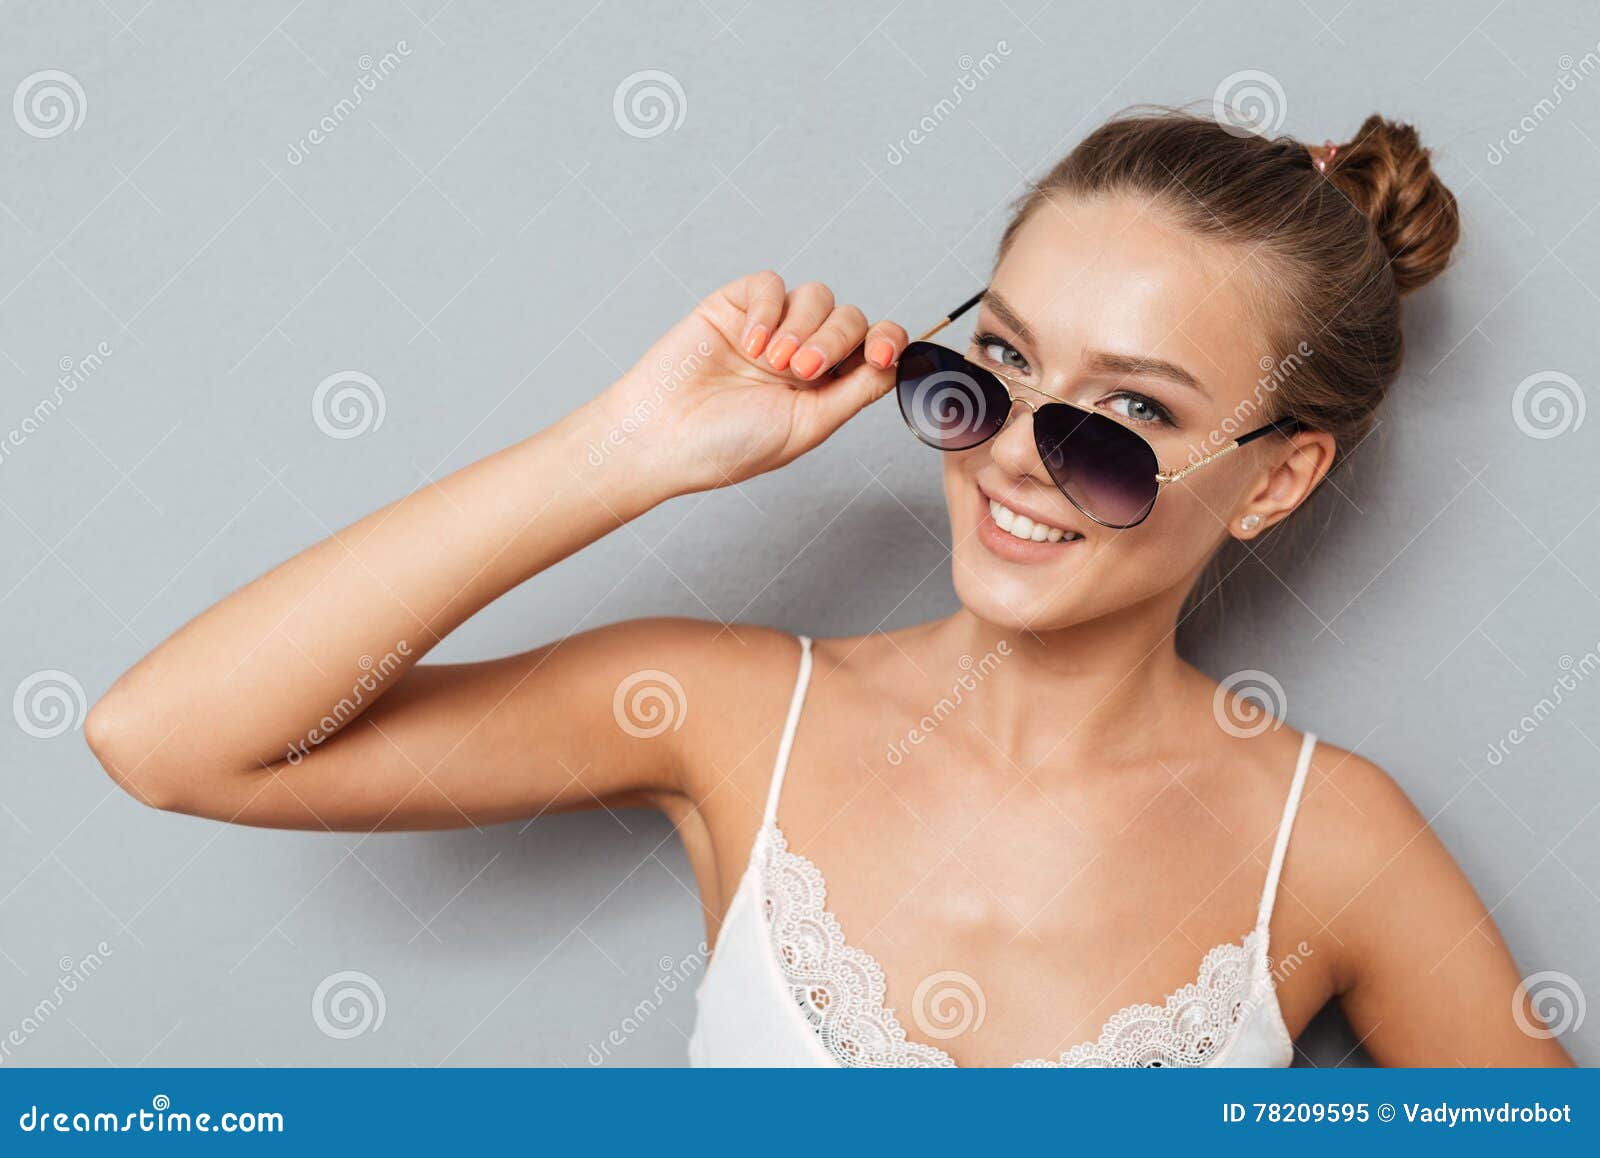 Close Up Portrait Of A Smiling Woman Holding Sunglasses Stock Image Image Of Advert Confident